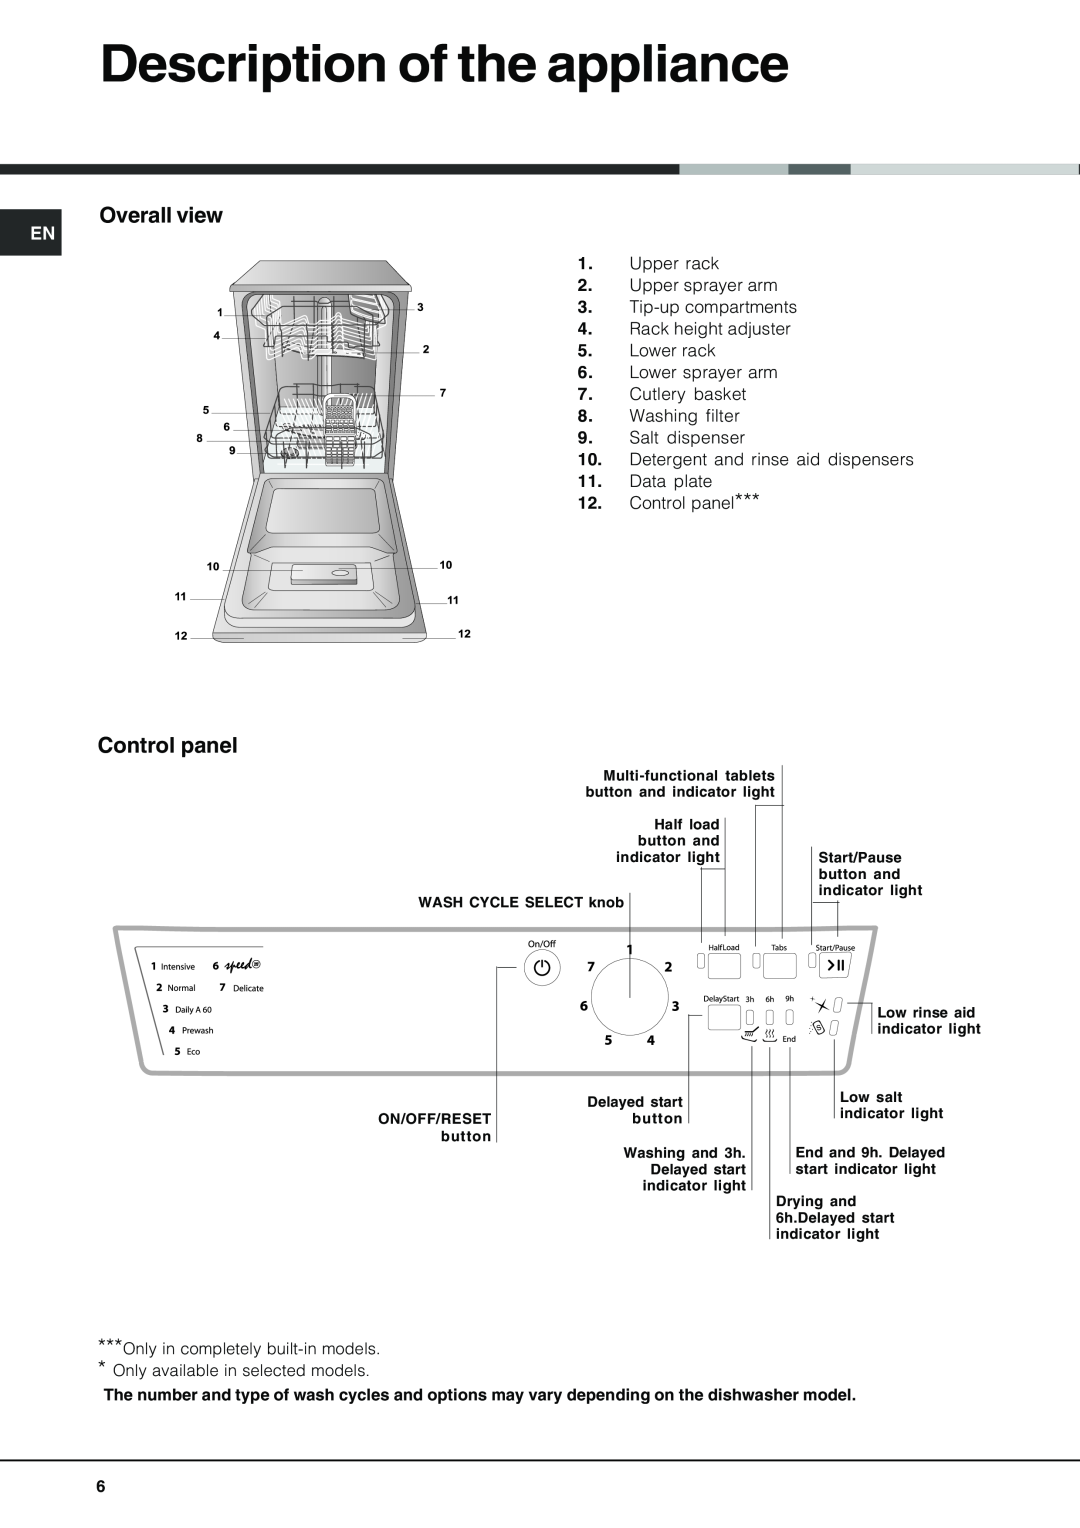 Hotpoint SDL 510 manual Description of the appliance, Overall view, Control panel 